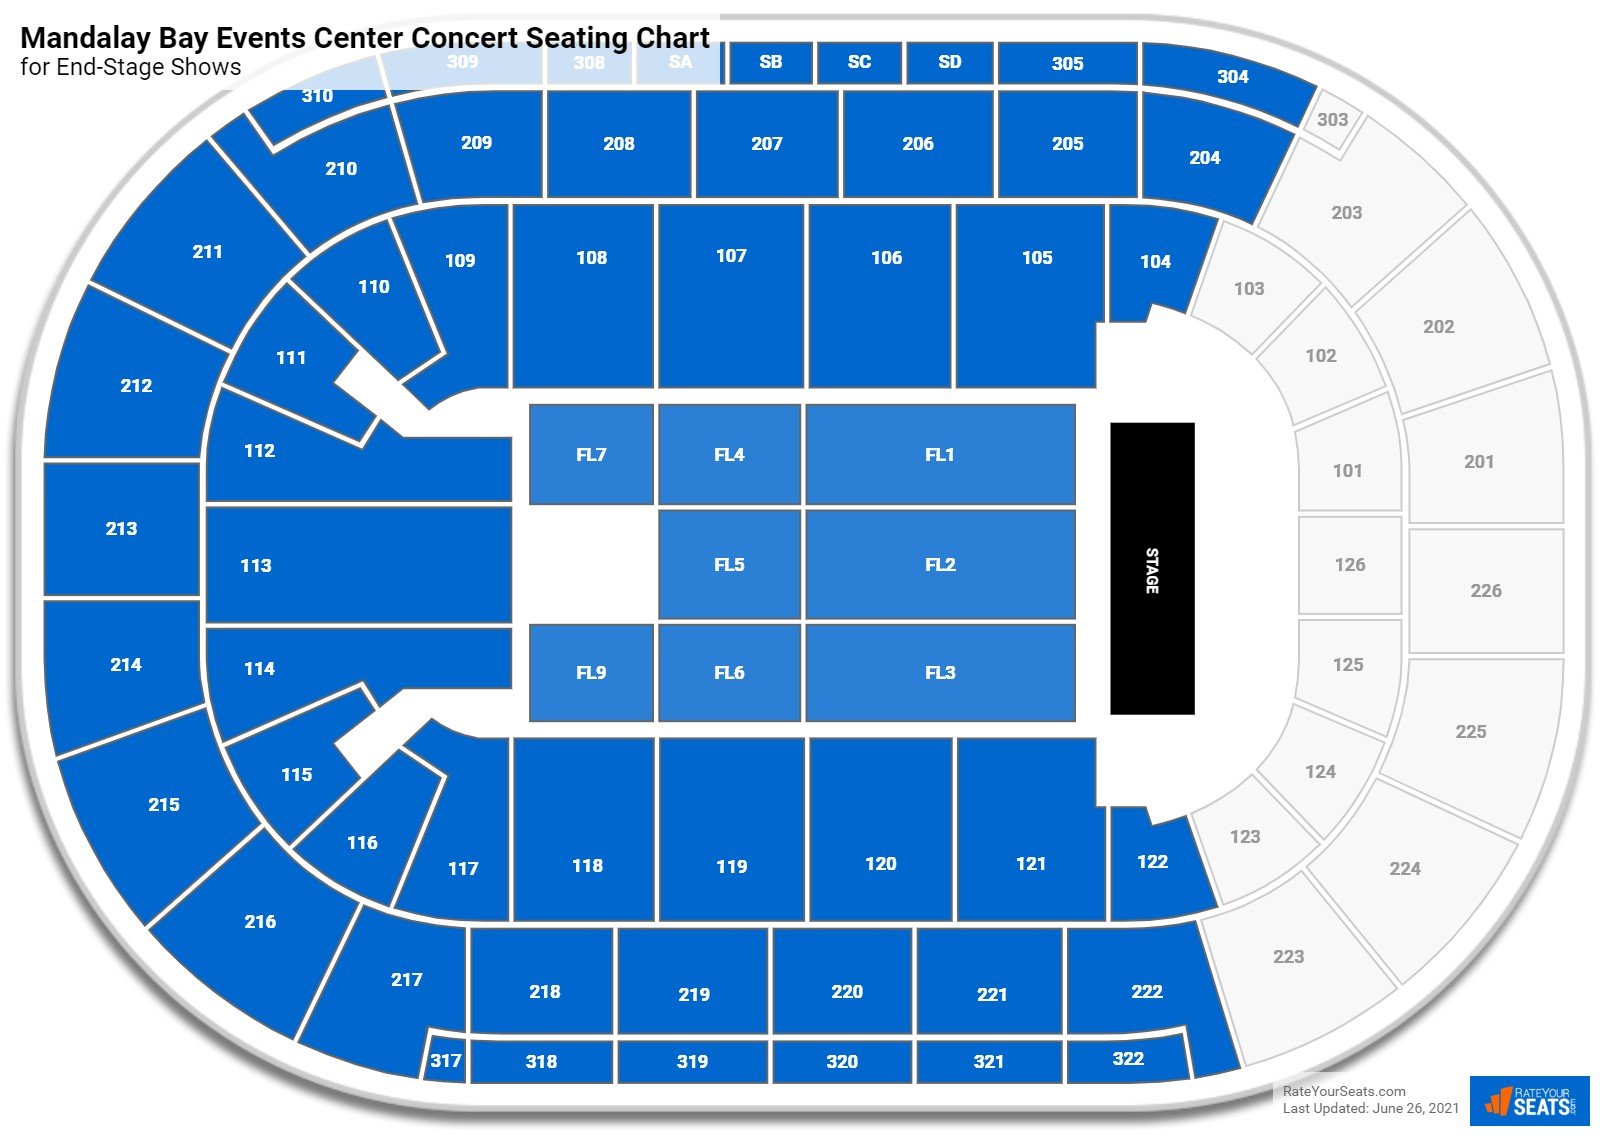 Michelob ULTRA Arena Concert Seating Chart